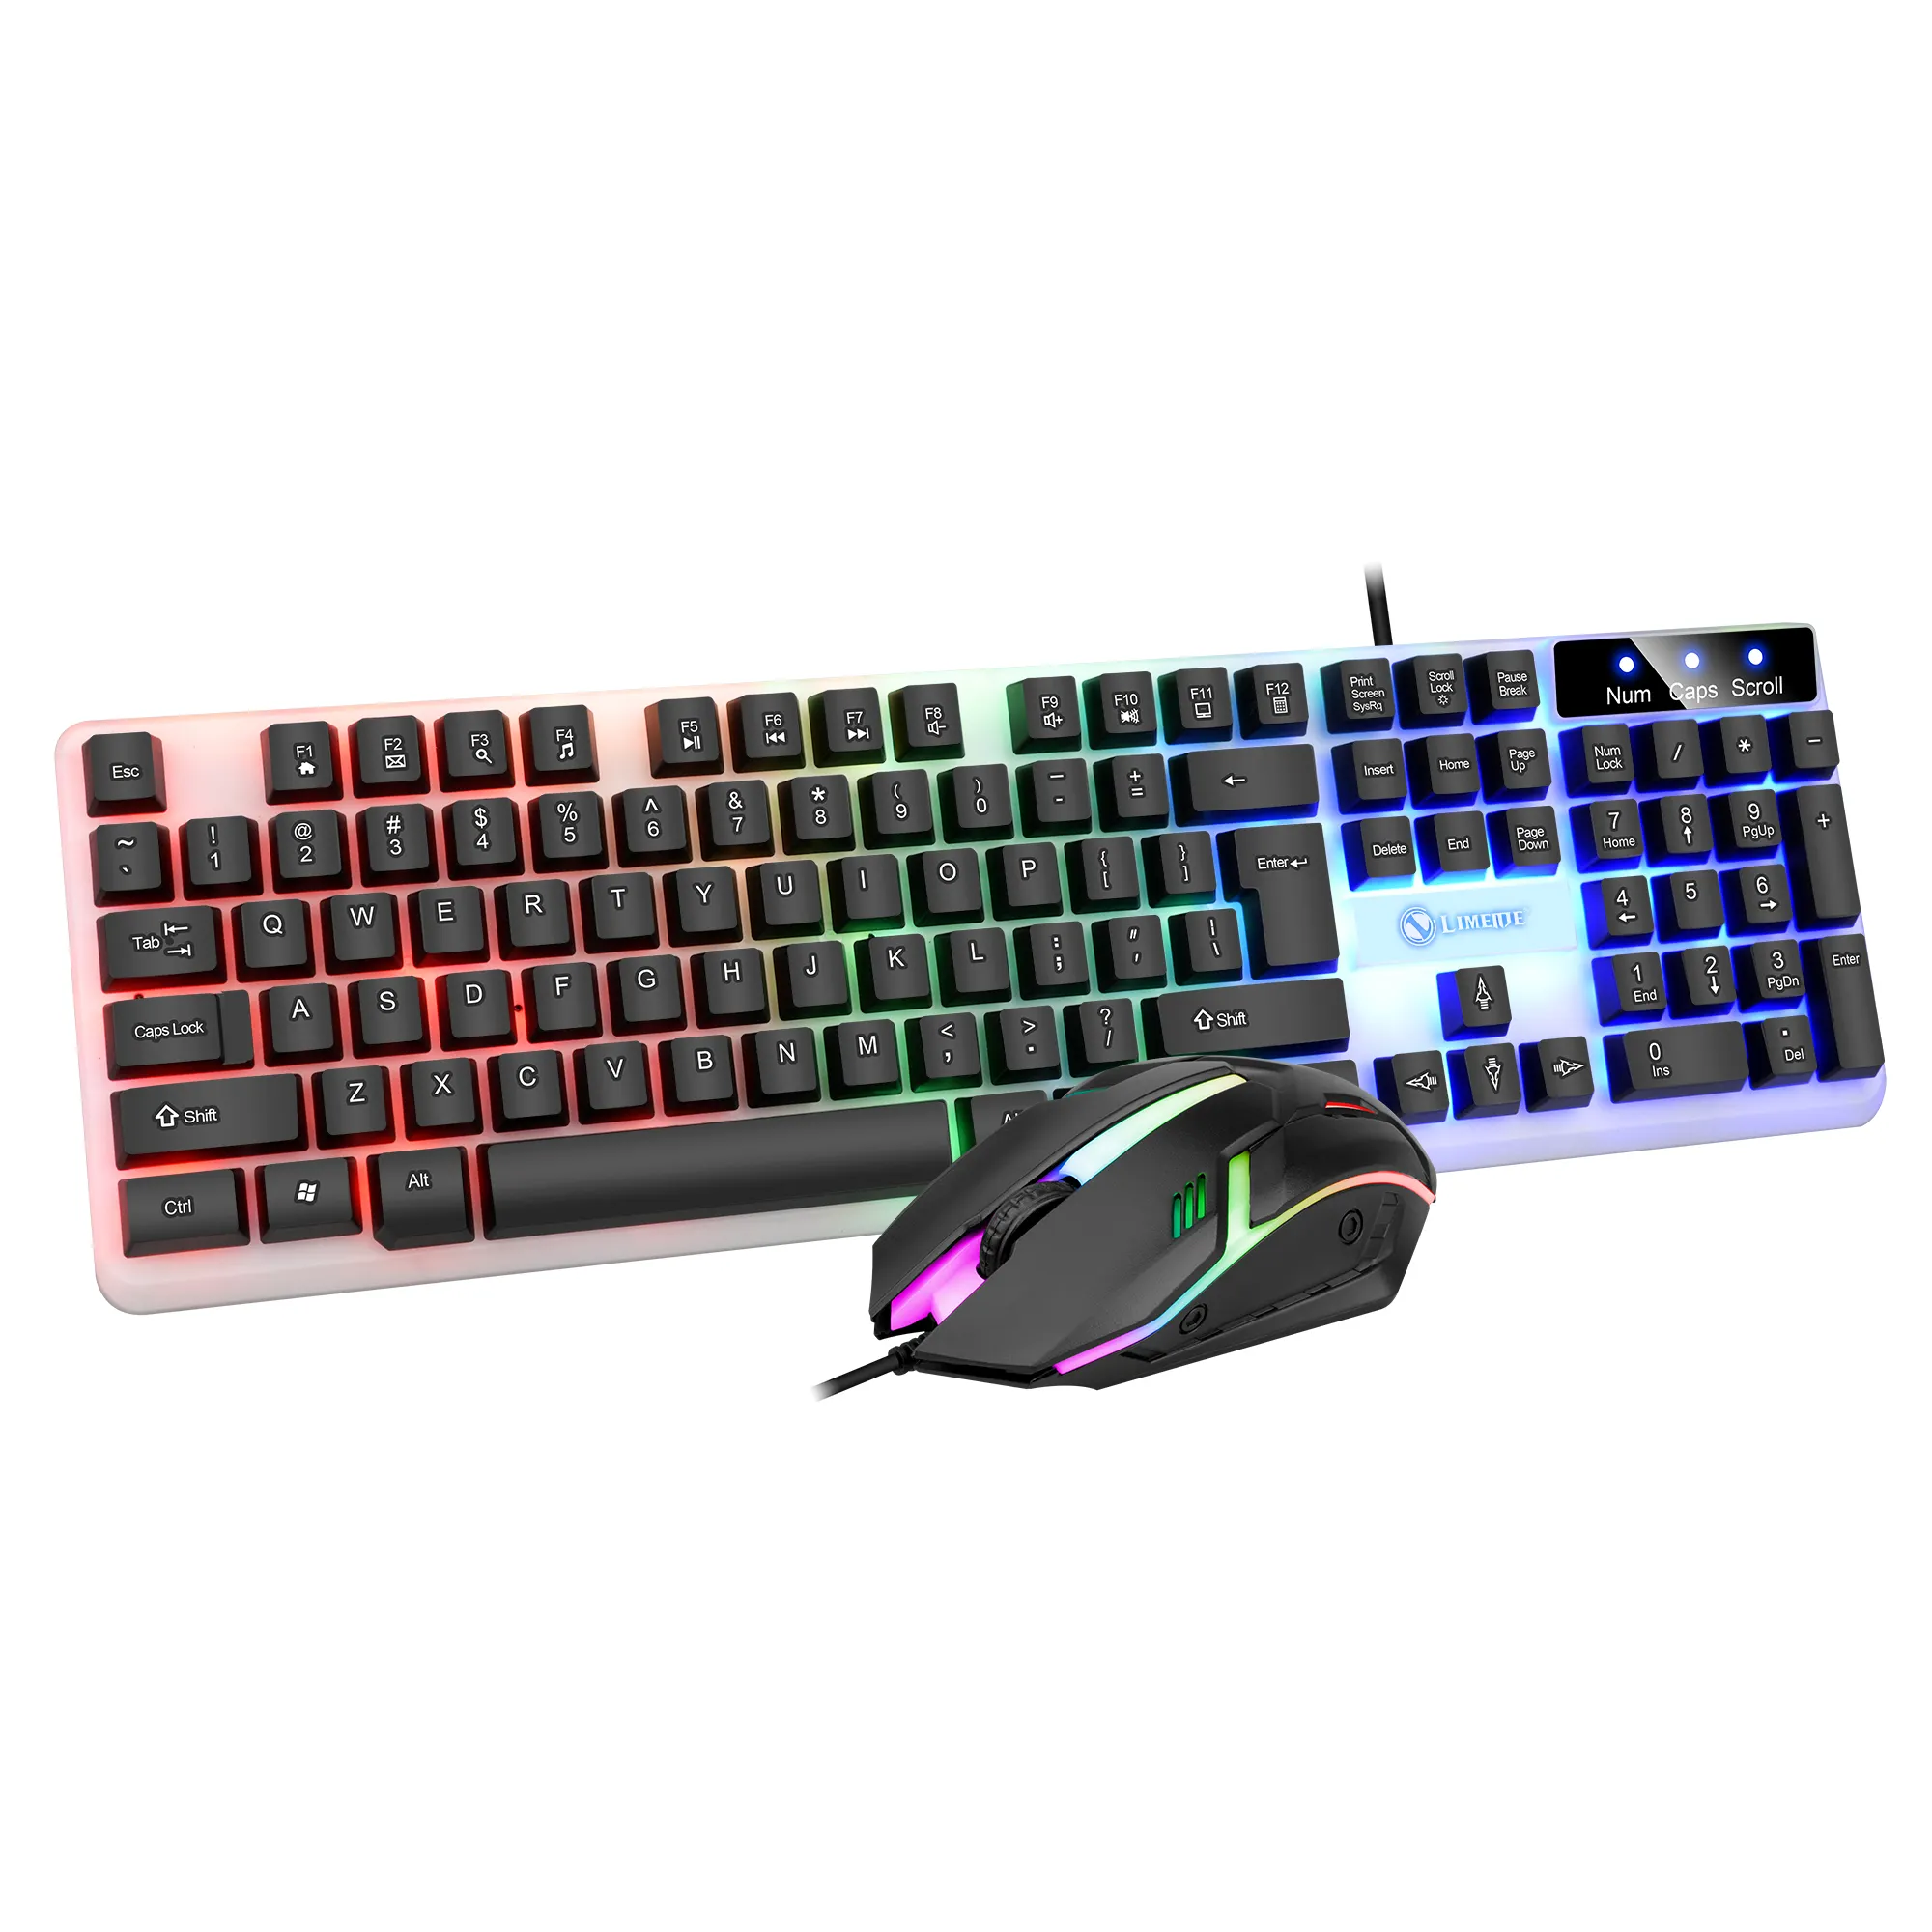 Hotselling fashionable Seven colors LED backlight wired gaming keyboard